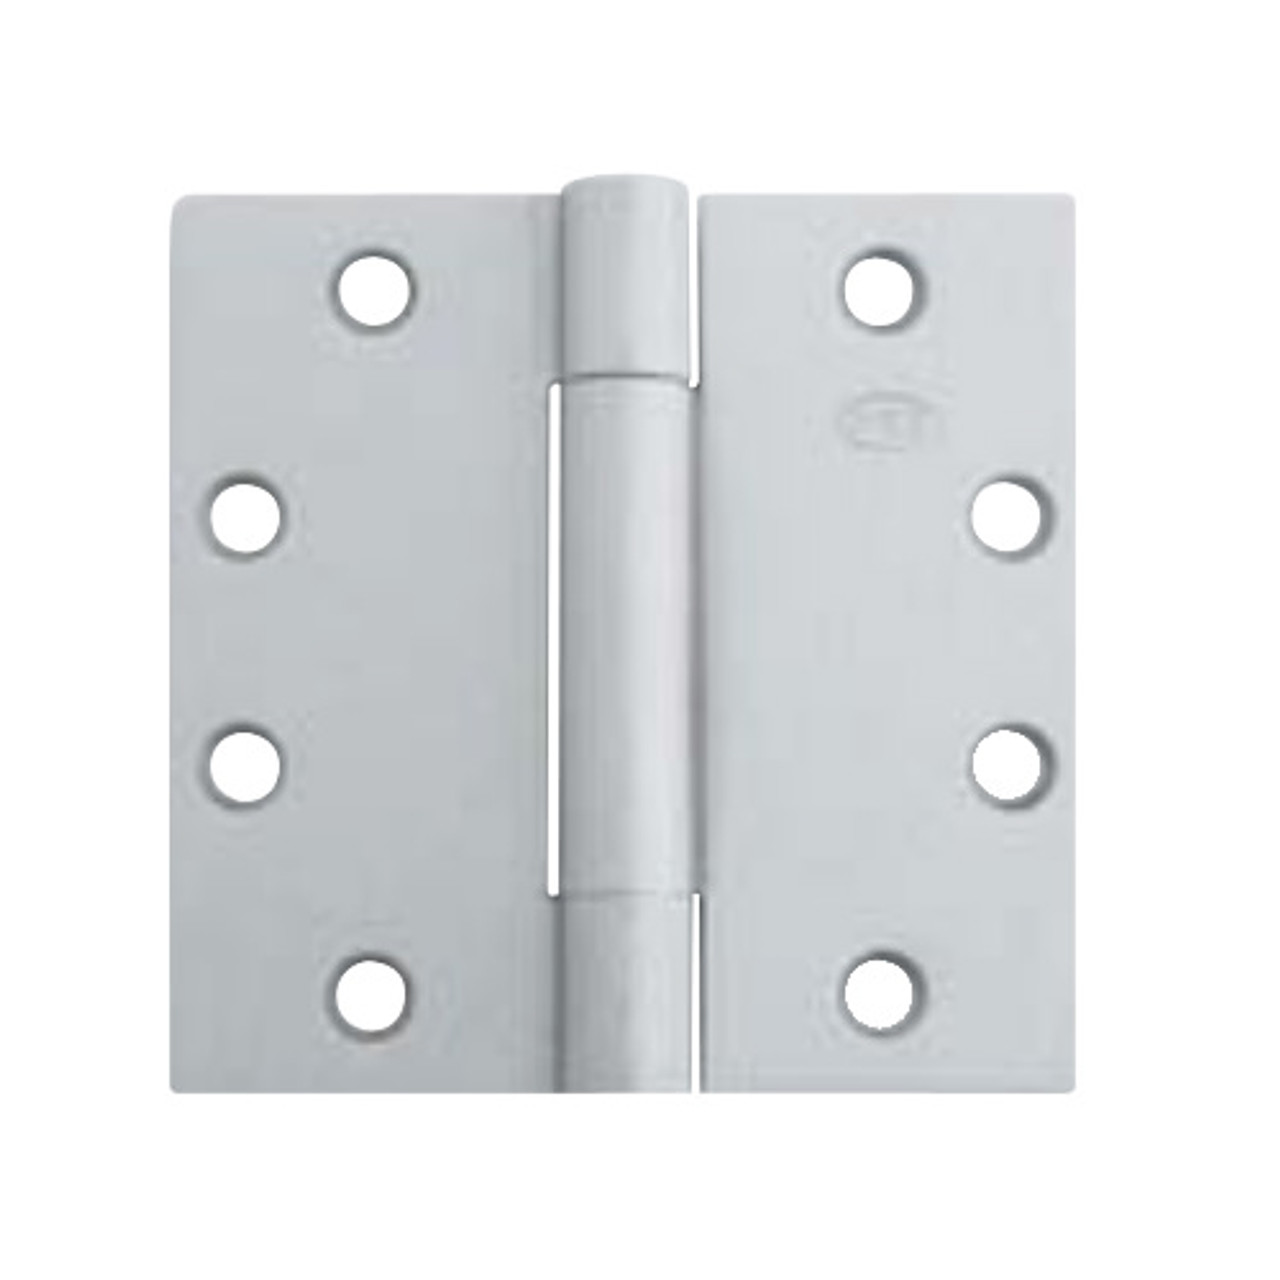 3CB1HW-4-5x4-5-600-NRP IVES 3 Knuckle Concealed Bearing Full Mortise Hinge in Primed for Paint - Steel